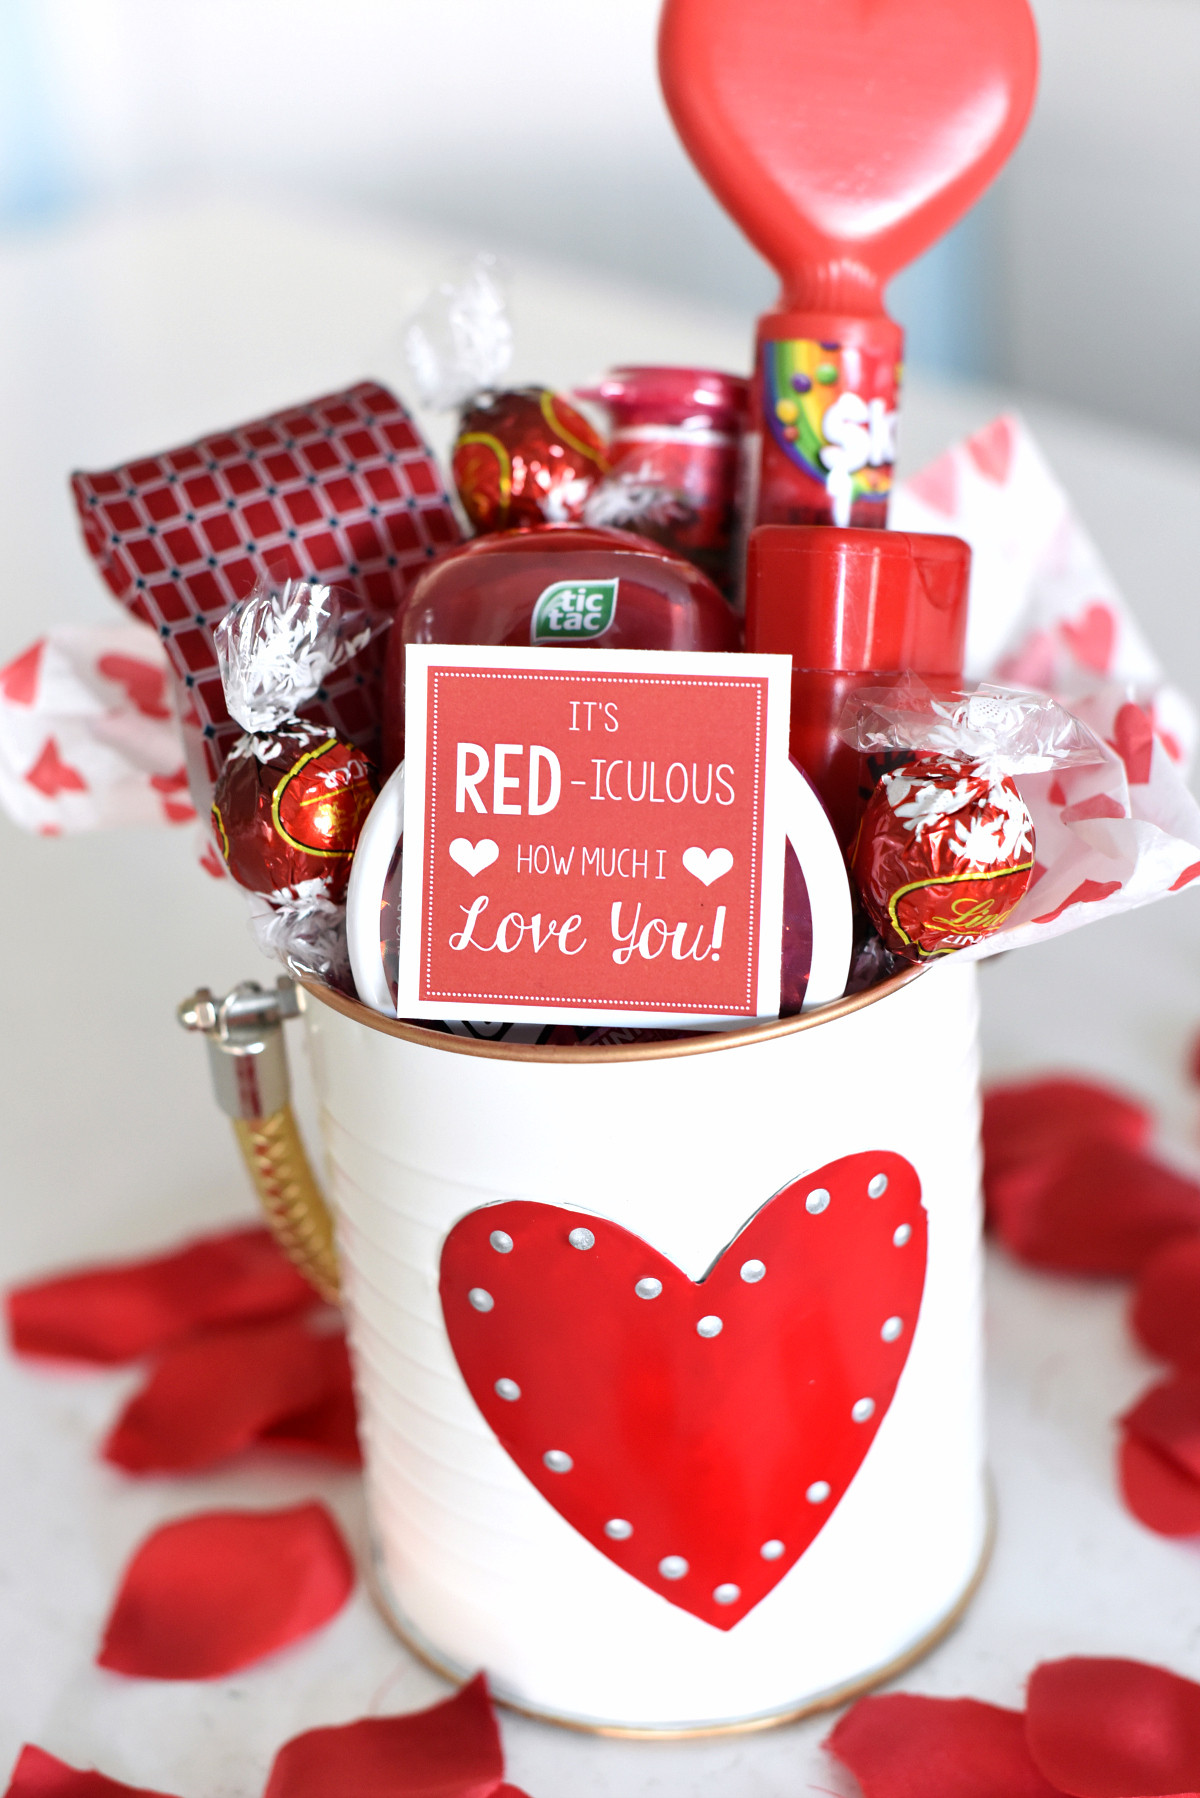 Cute Valentines Day Gift Ideas
 Cute Valentine s Day Gift Idea RED iculous Basket